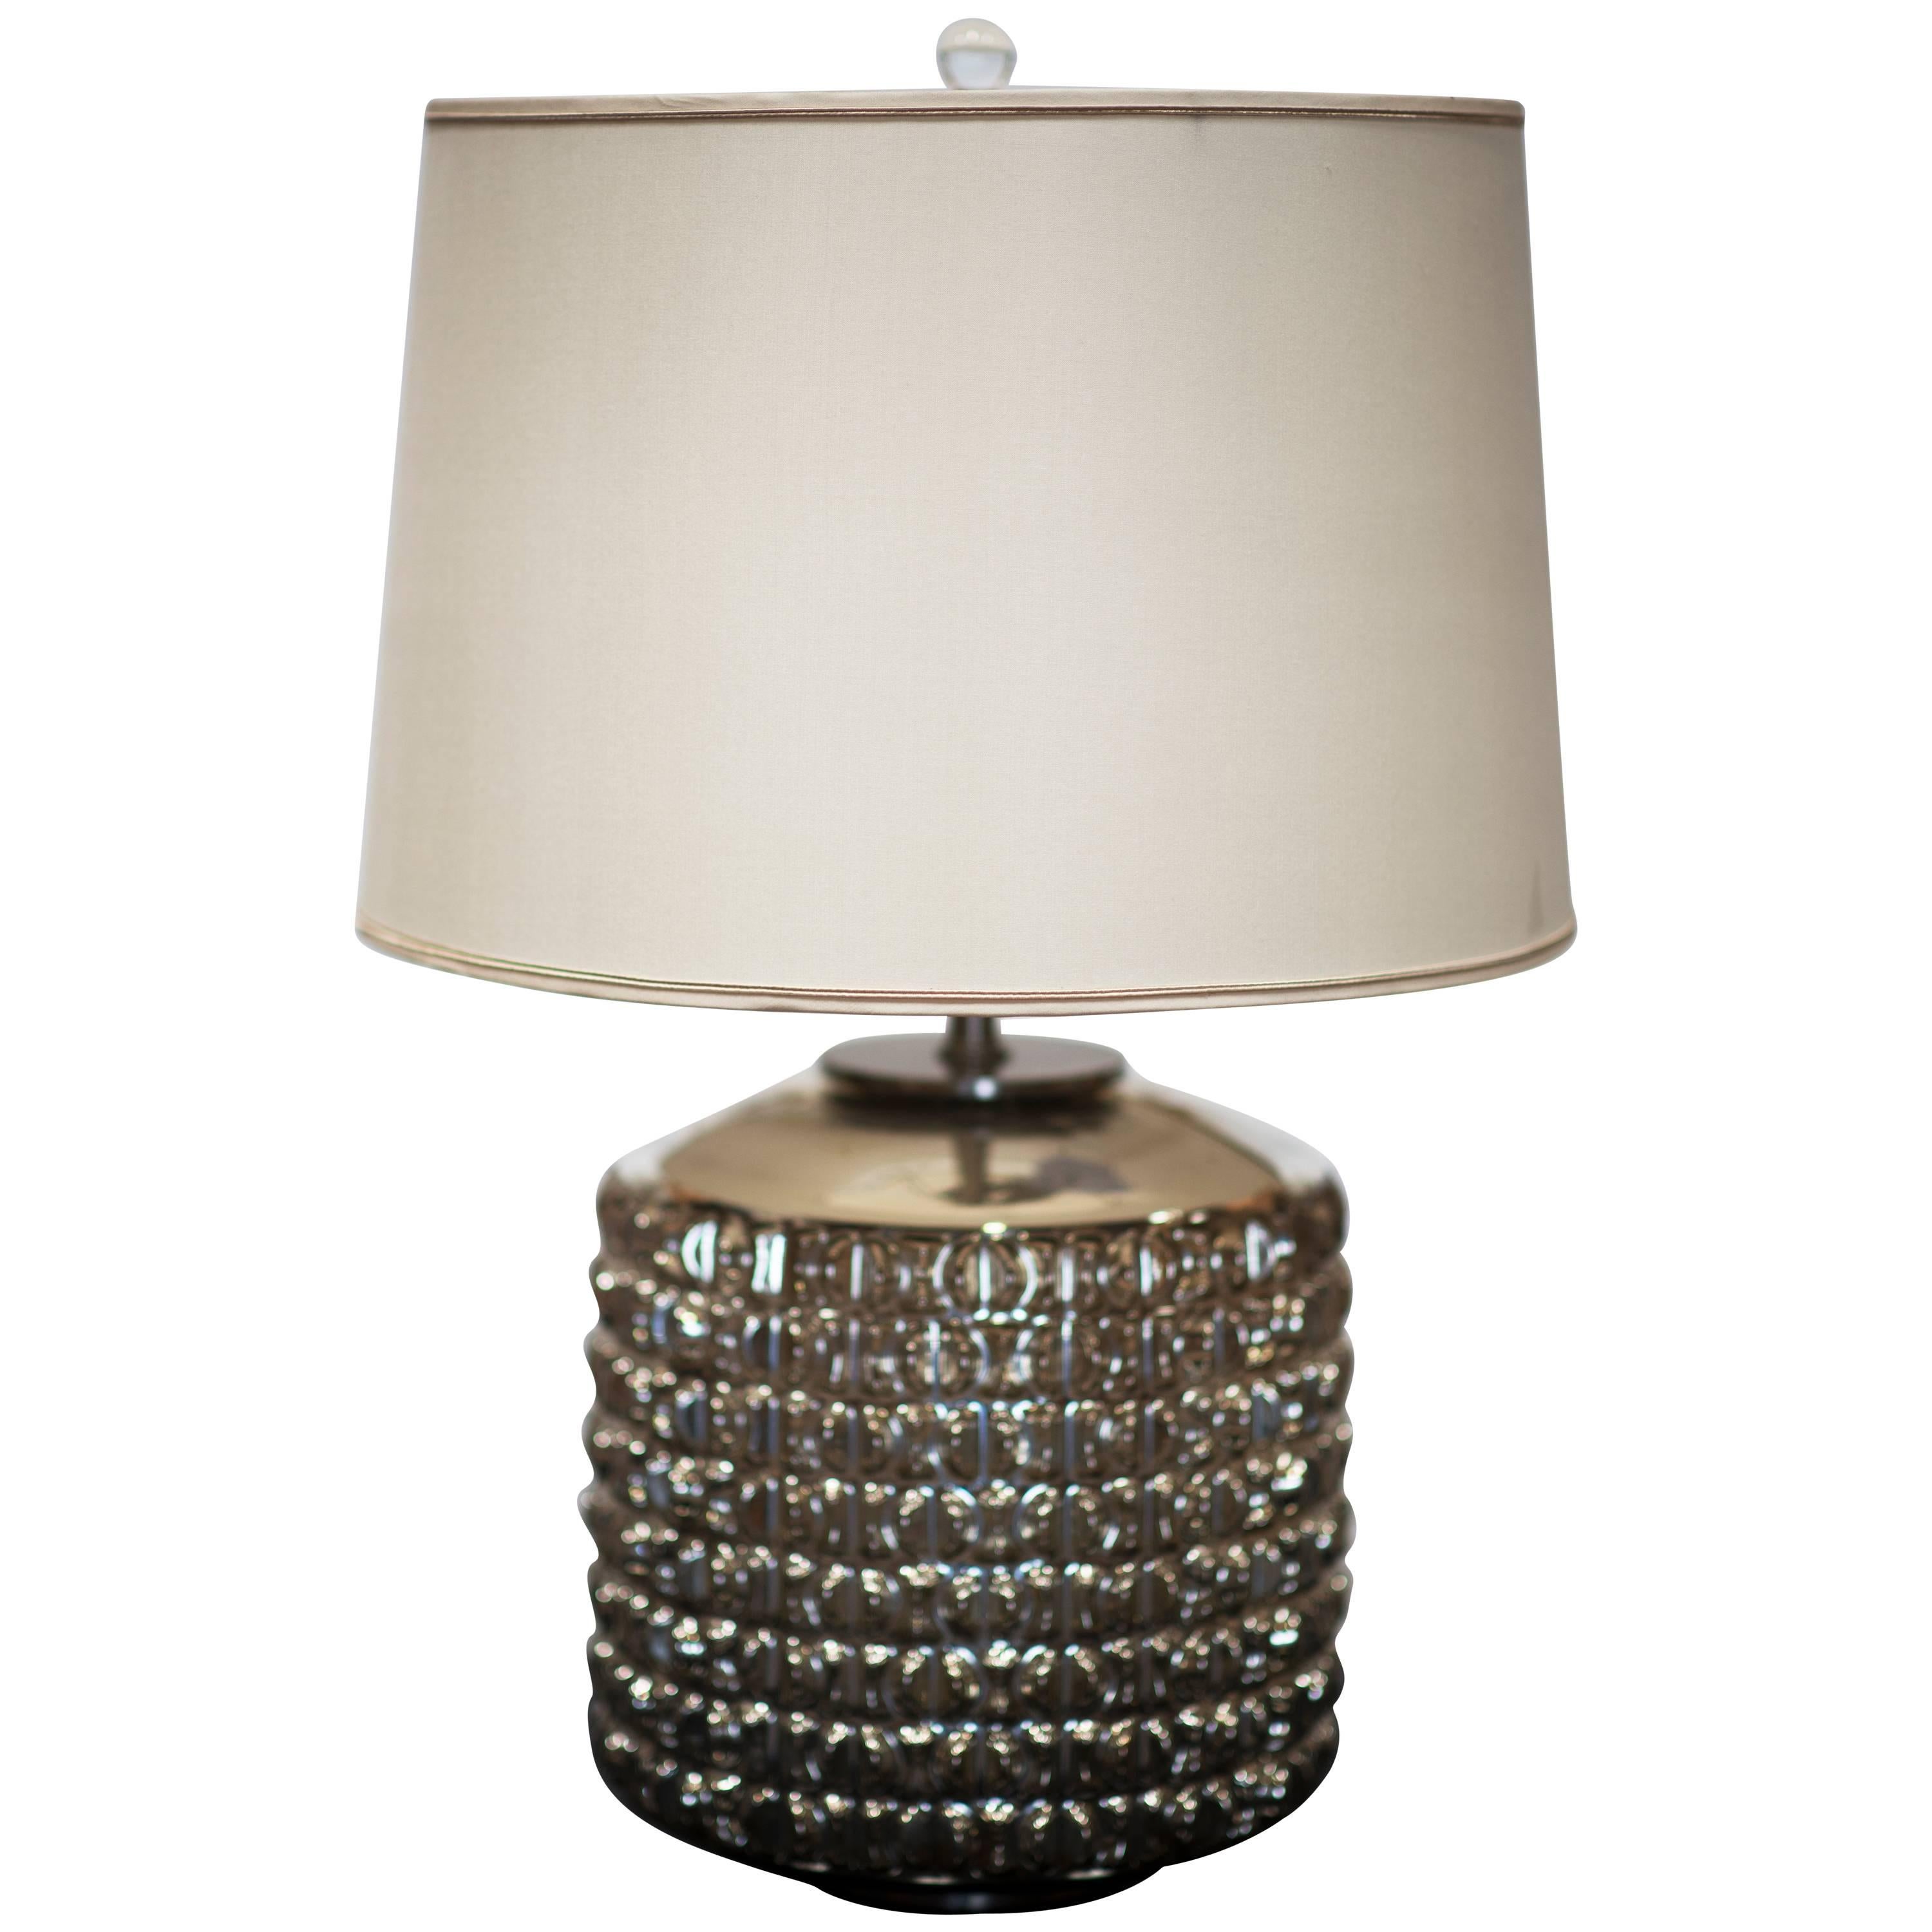 A stylish geometric form cylinder lamp in champagne mercury glass with a raised patterned finish circa 1960s. The intrinsic details of this lamp stands out even more when lighted. Instantly update your home with this gorgeous lighting design. The